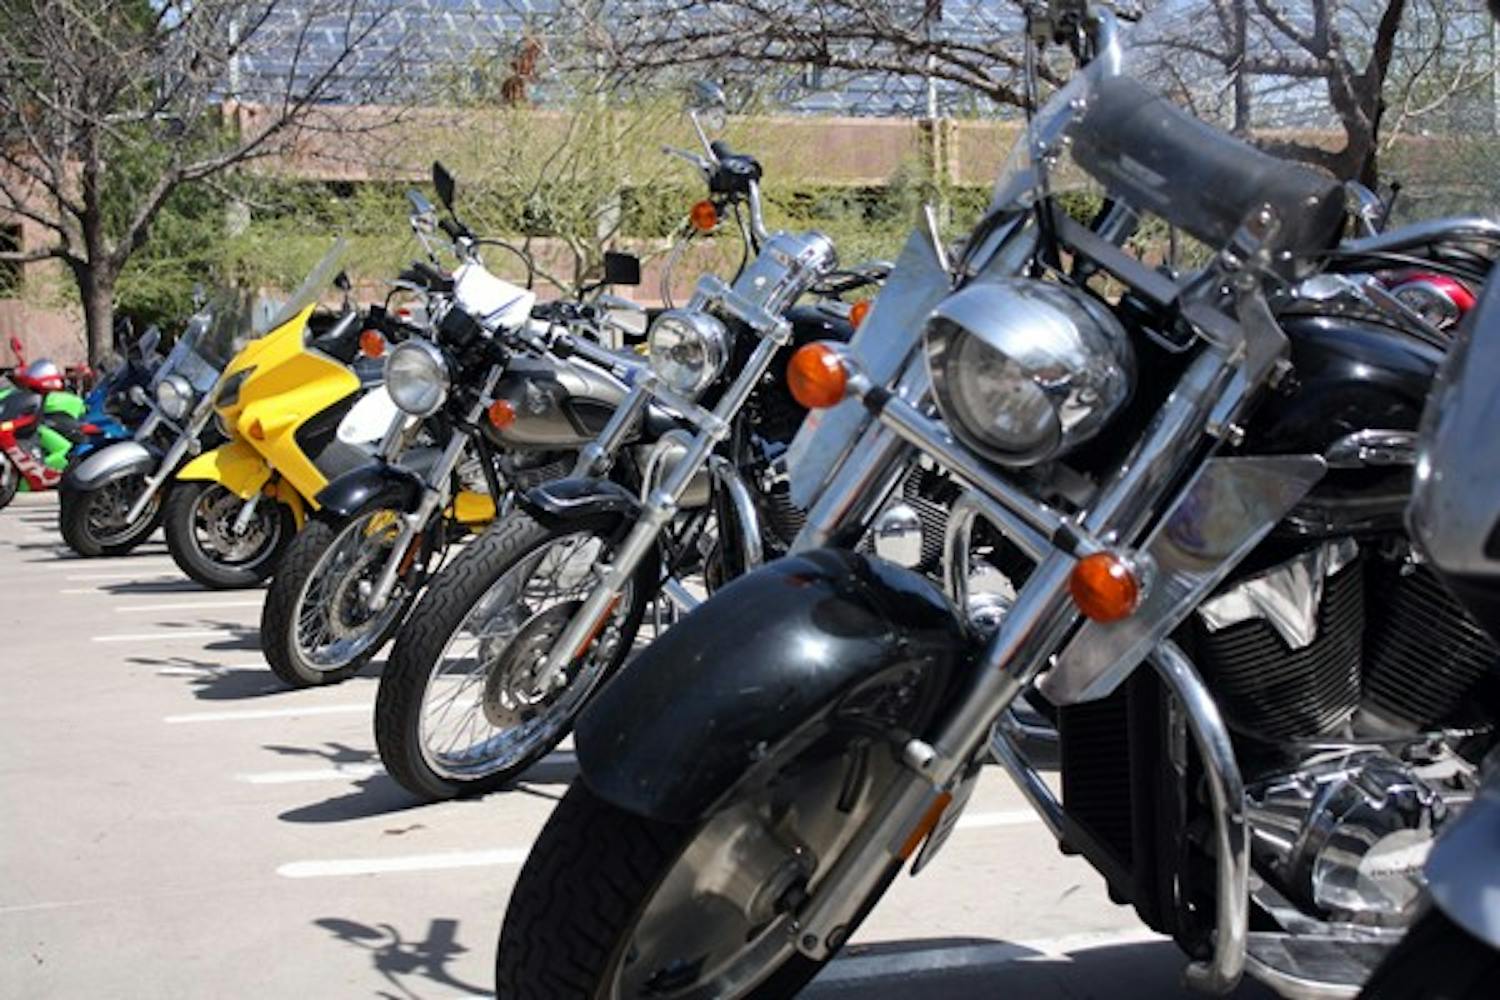 The ASU Police Department reported an increase in motorcycle riders on University campuses as a result of the nicer weather and increasing gas prices. (Photo by Shawn Raymundo)